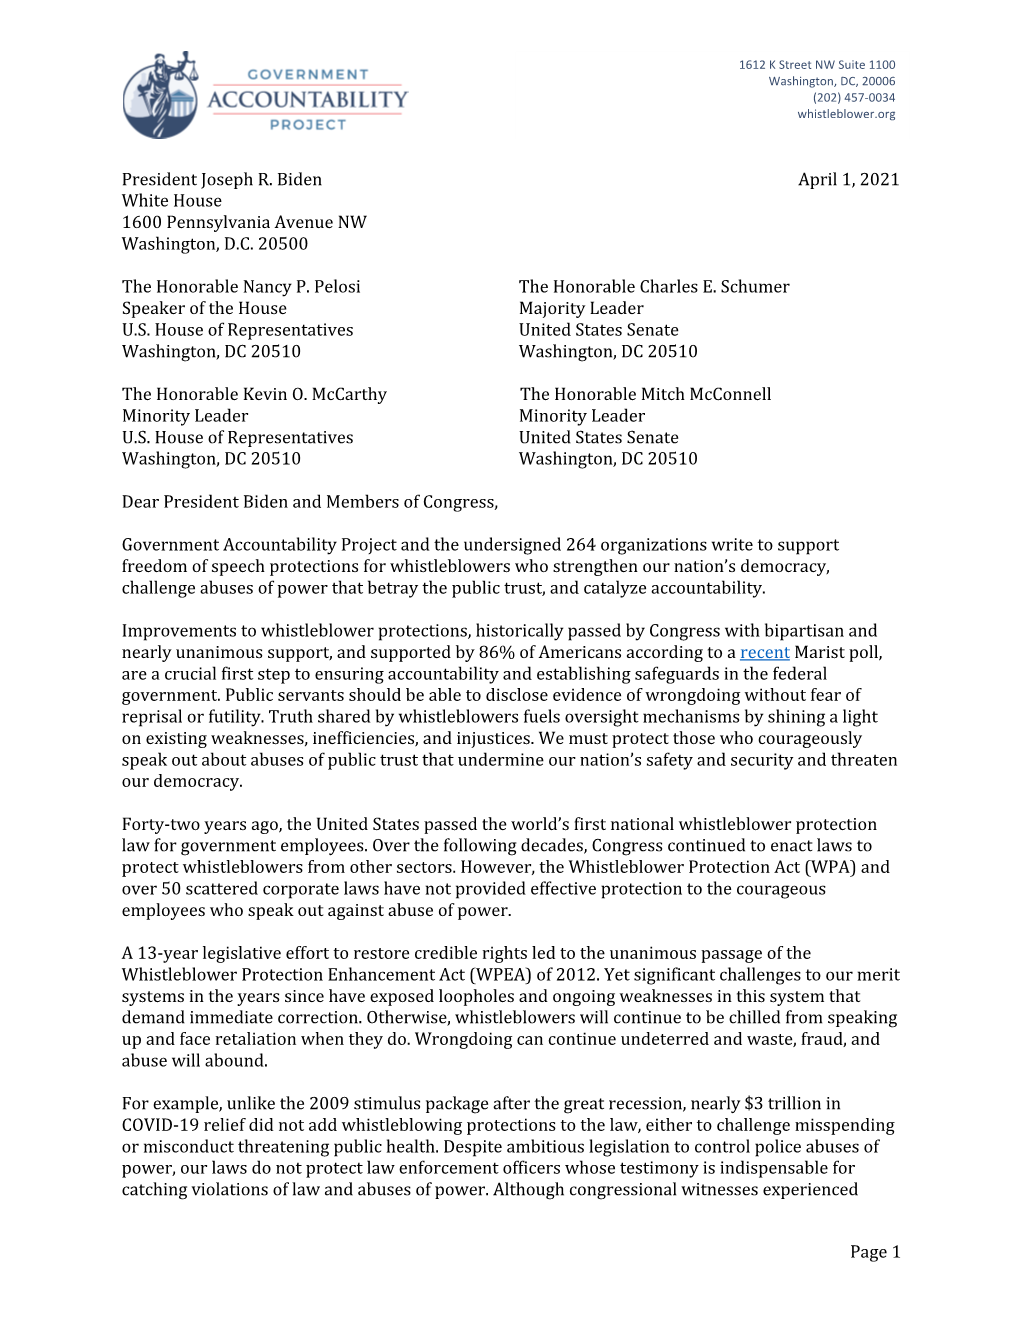 Government Accountability Project Letter to President Biden on Support for Whistleblower Protections